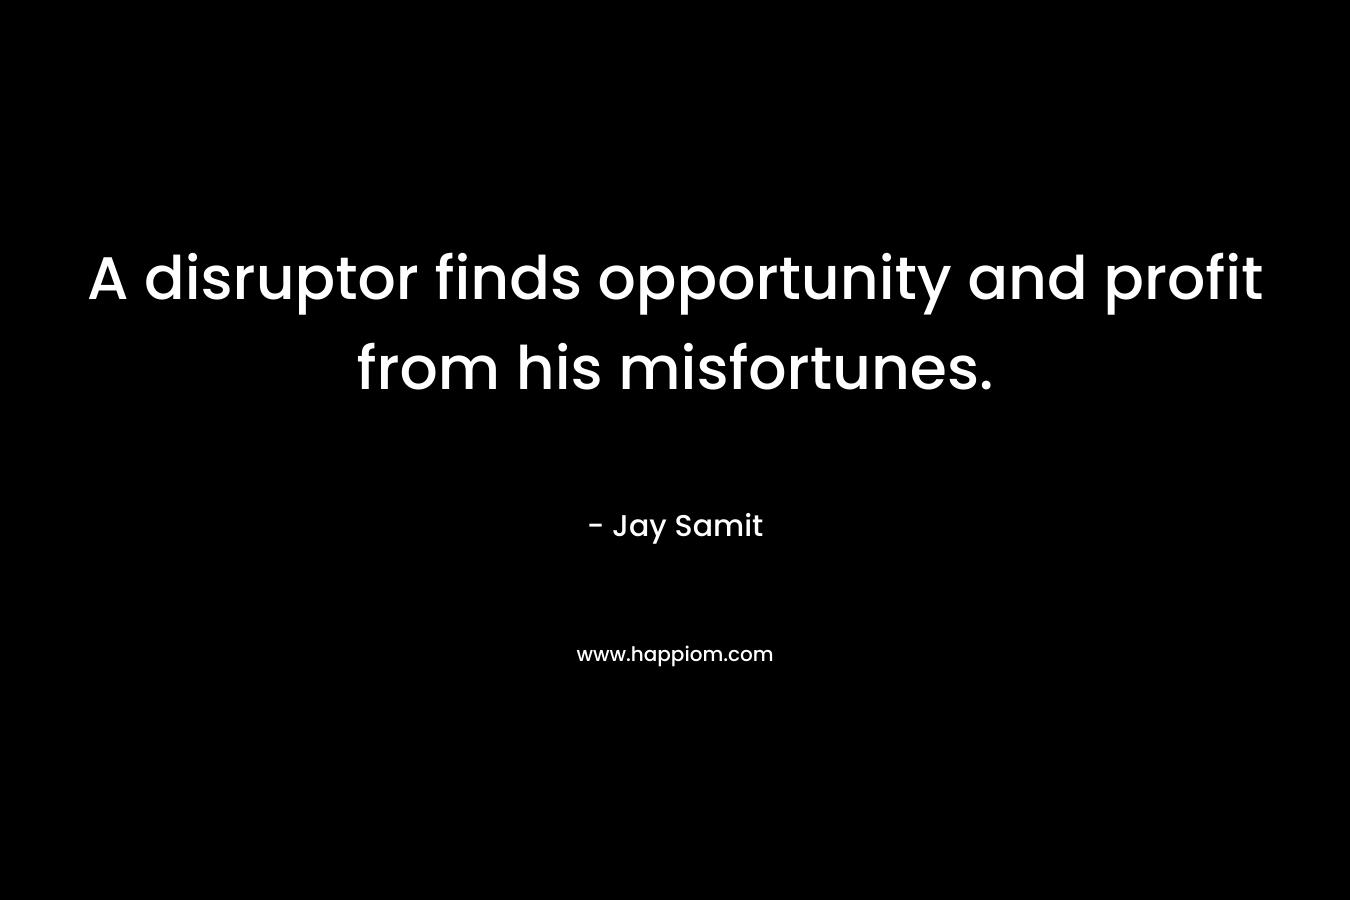 A disruptor finds opportunity and profit from his misfortunes.